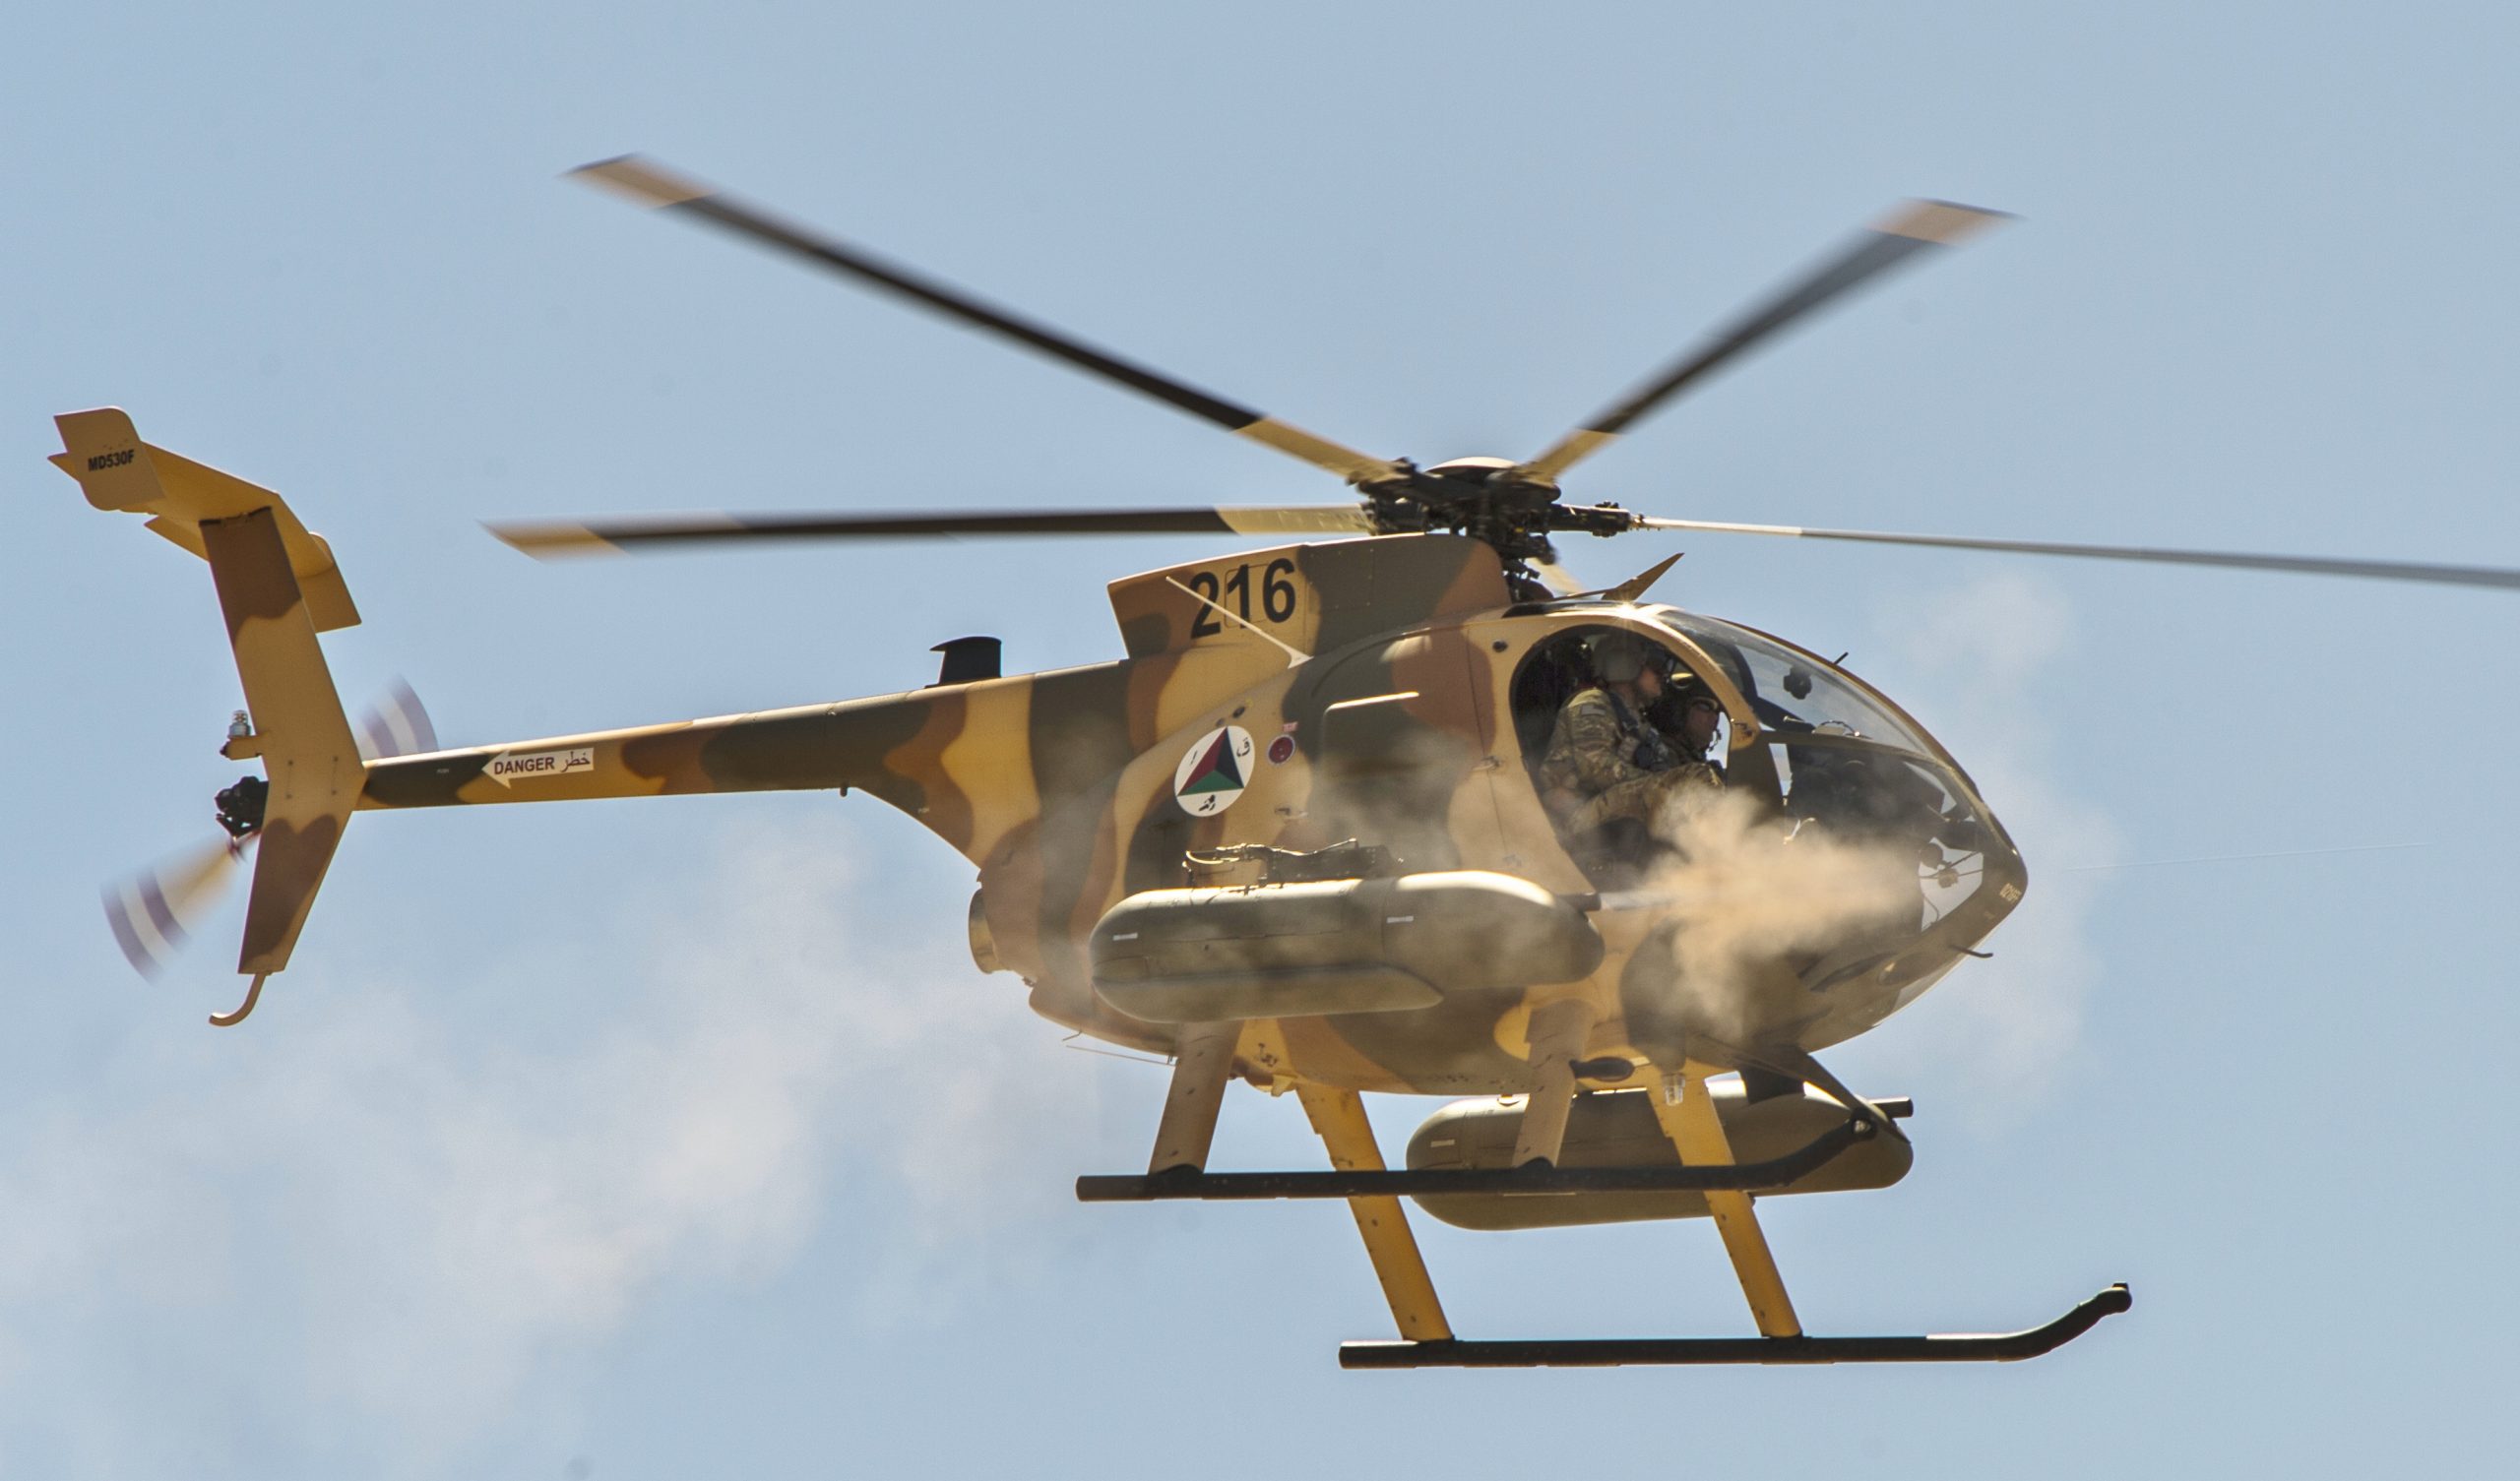 Afghan Air Force MD-530F Cayuse Warrior helicopter fires its two FN M3P .50 Cal machine guns during a media demonstration, April 9, 2015, at a training range outside of Kabul, Afghanistan. www.businesstoday.co.ke